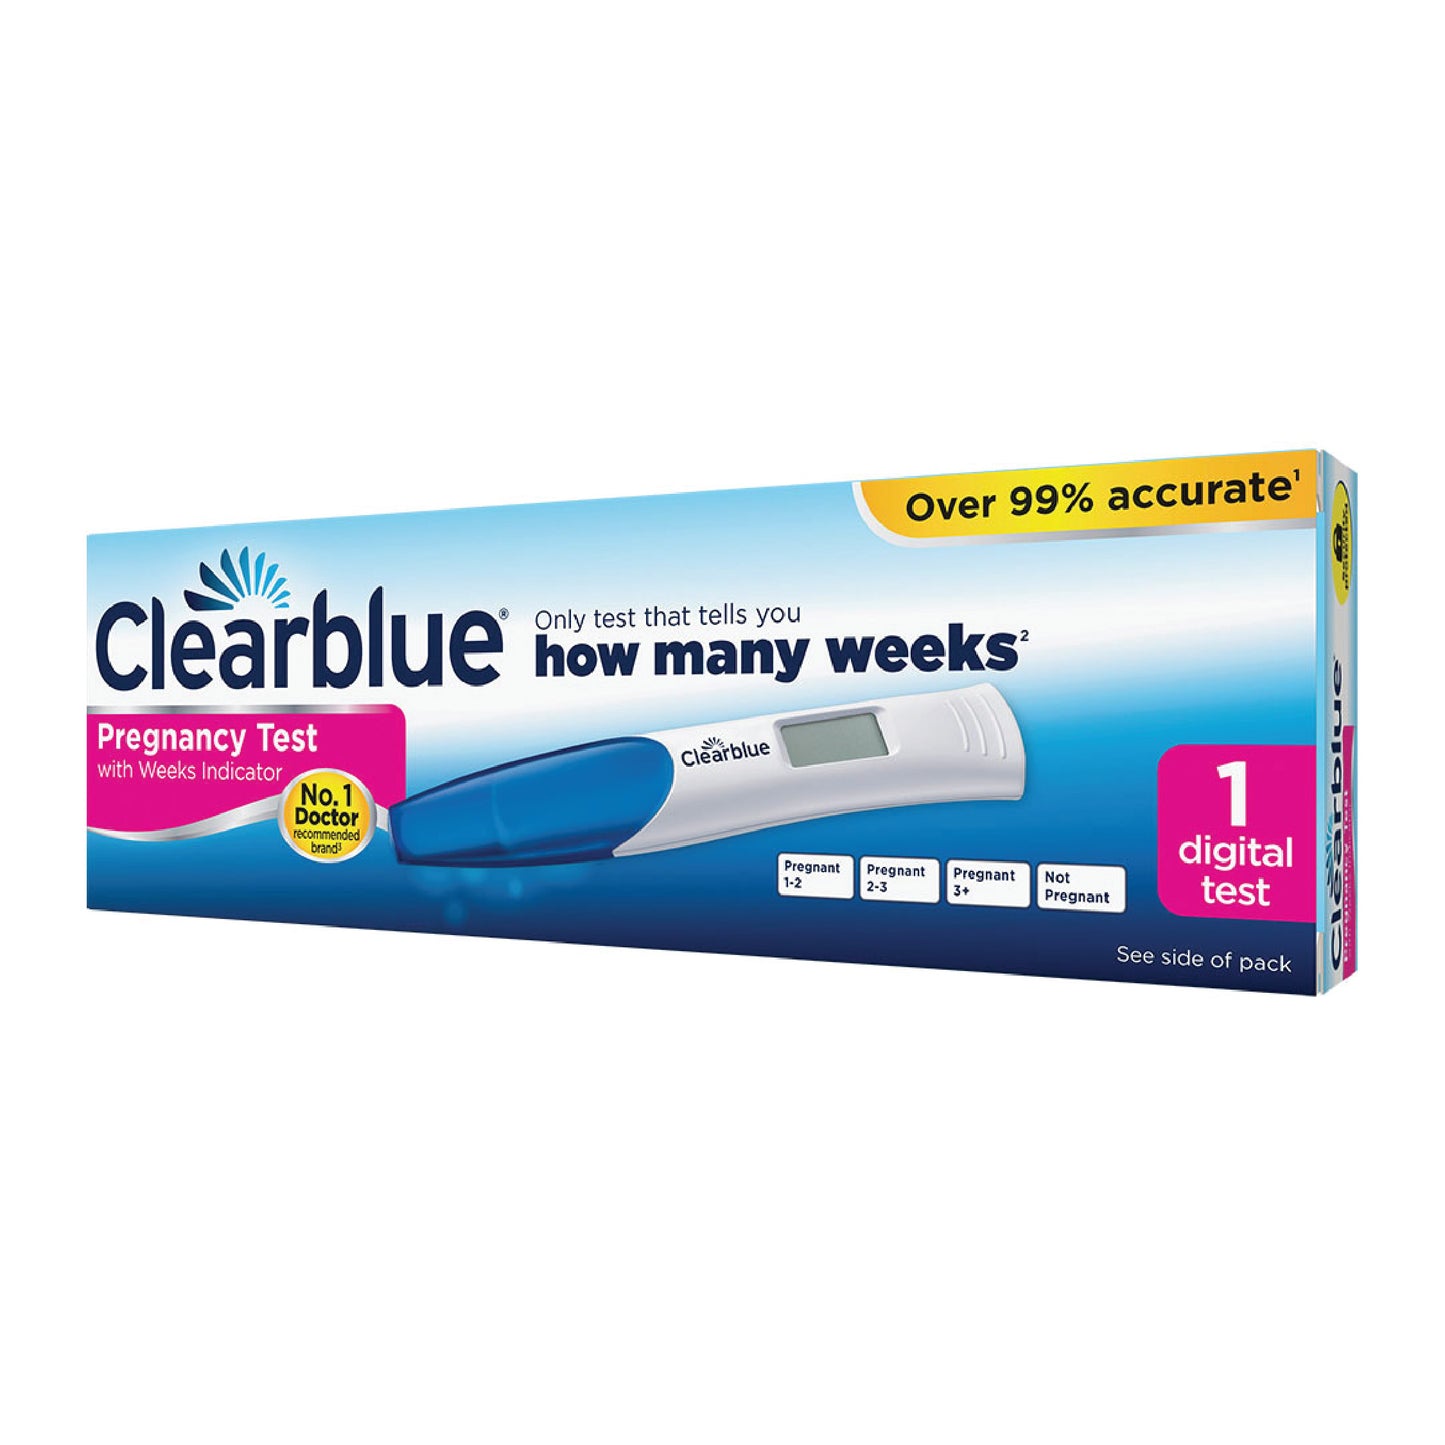 Pregnancy Tests - Clearblue Digital Pregnancy Test with Conception Indicator - Medaid - Lebanon